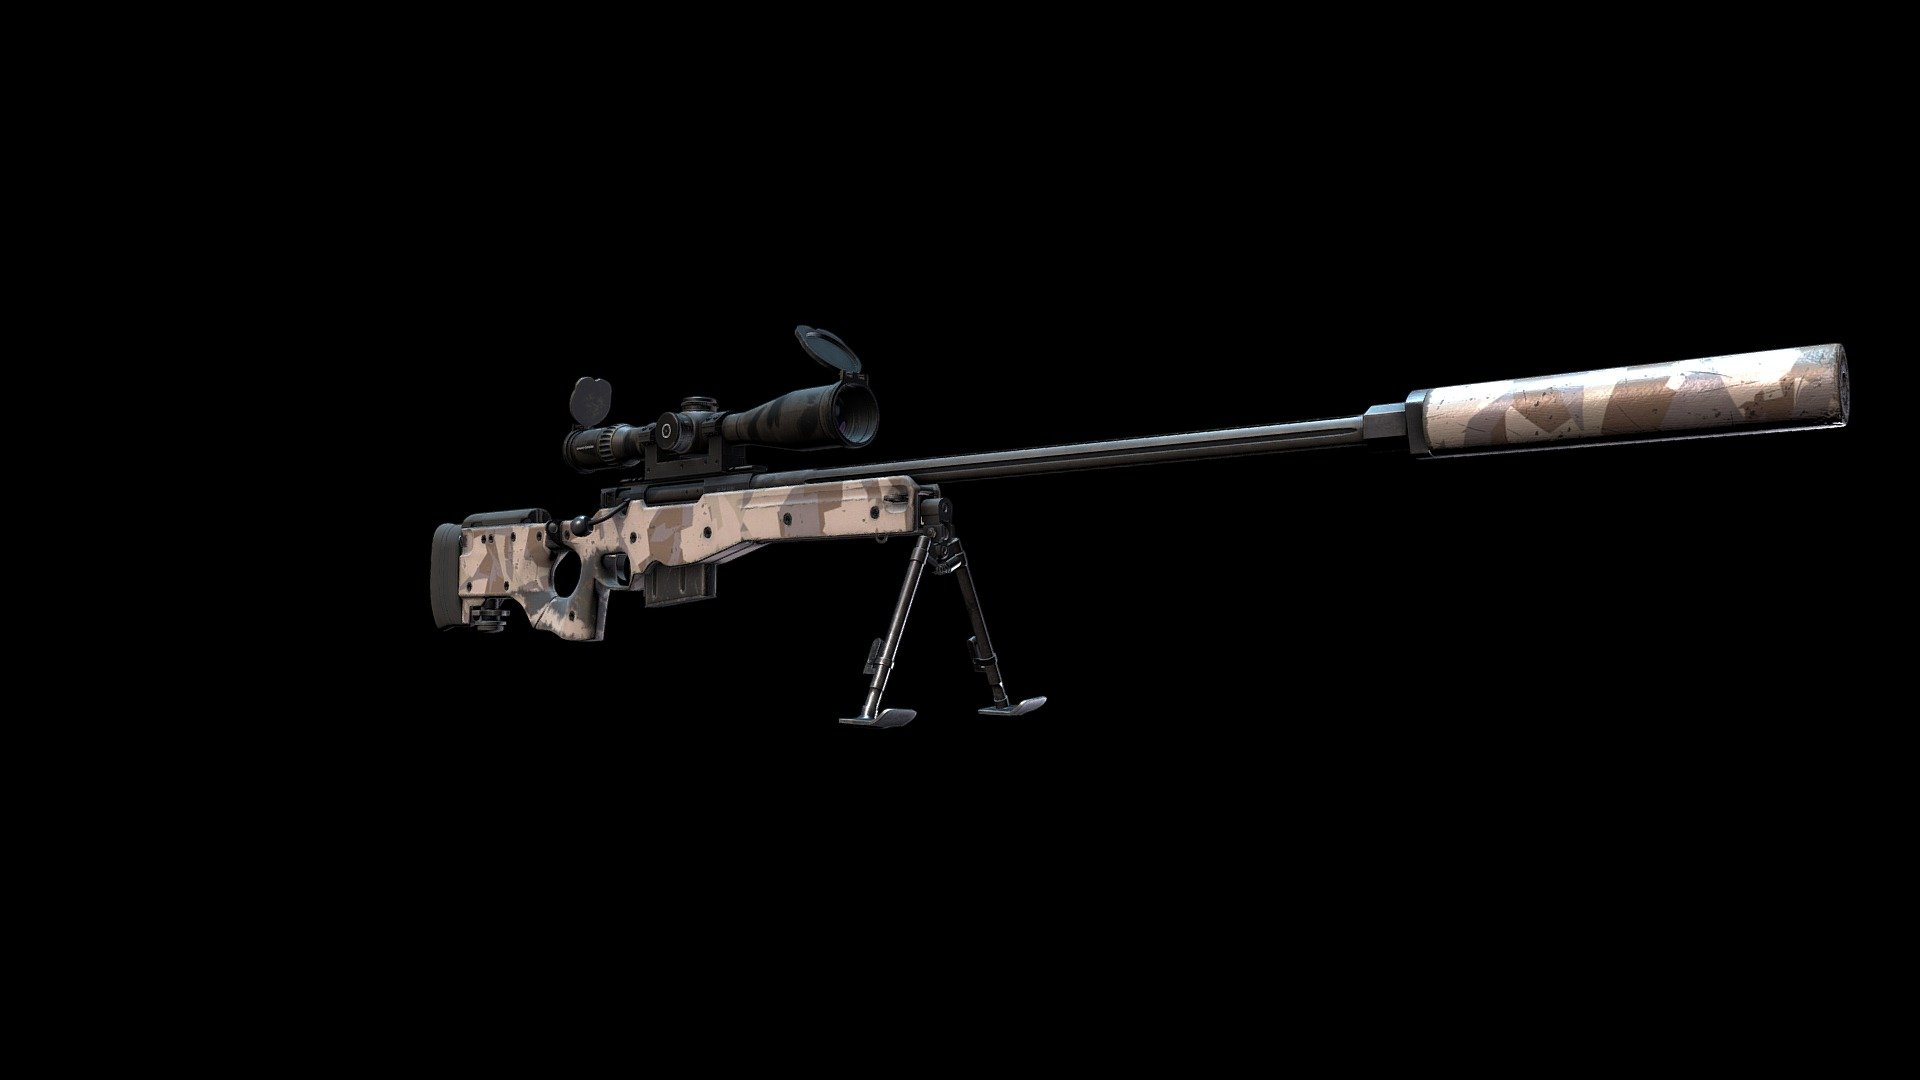 Accuracy International's L115A3 sniper rifle does it again – six